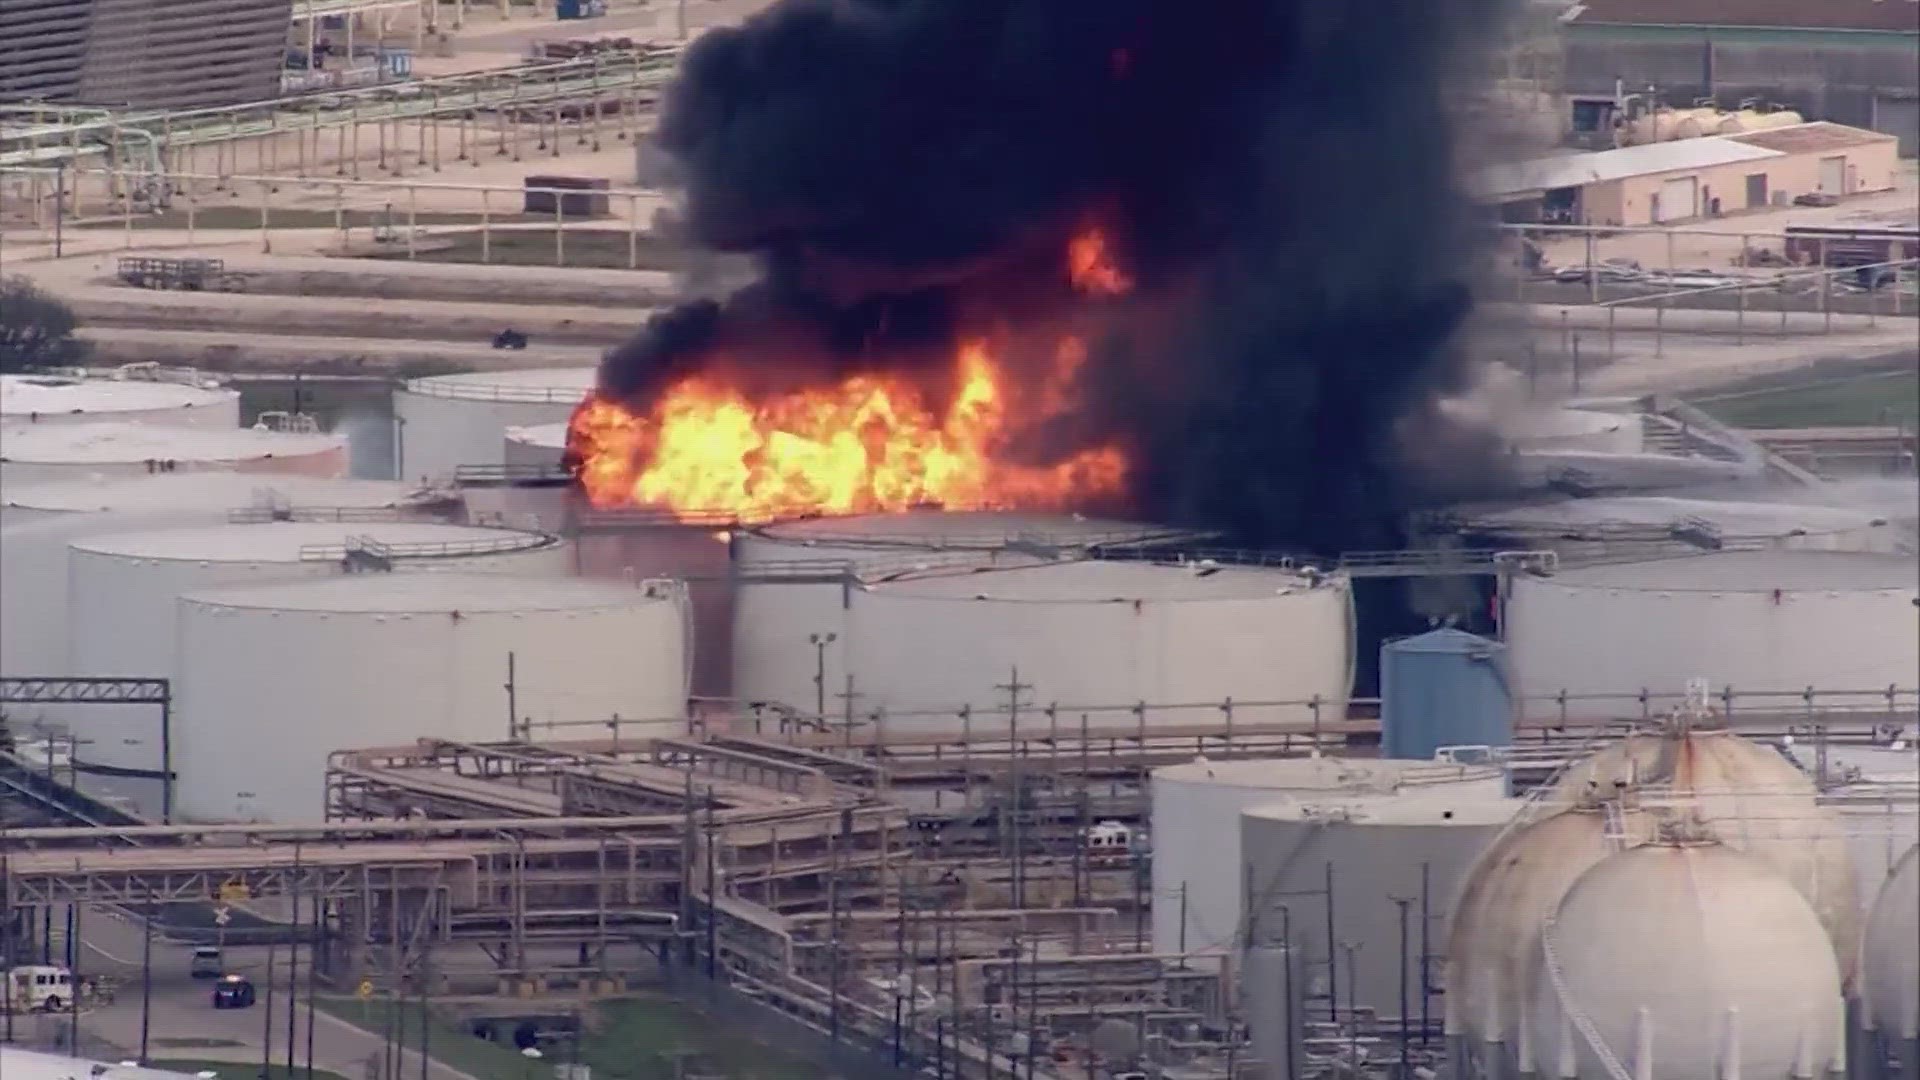 International Terminals Company, LLC has agreed to a $6.6 million settlement for injuries to natural resources resulting from the 2019 chemical fire in Deer Park.